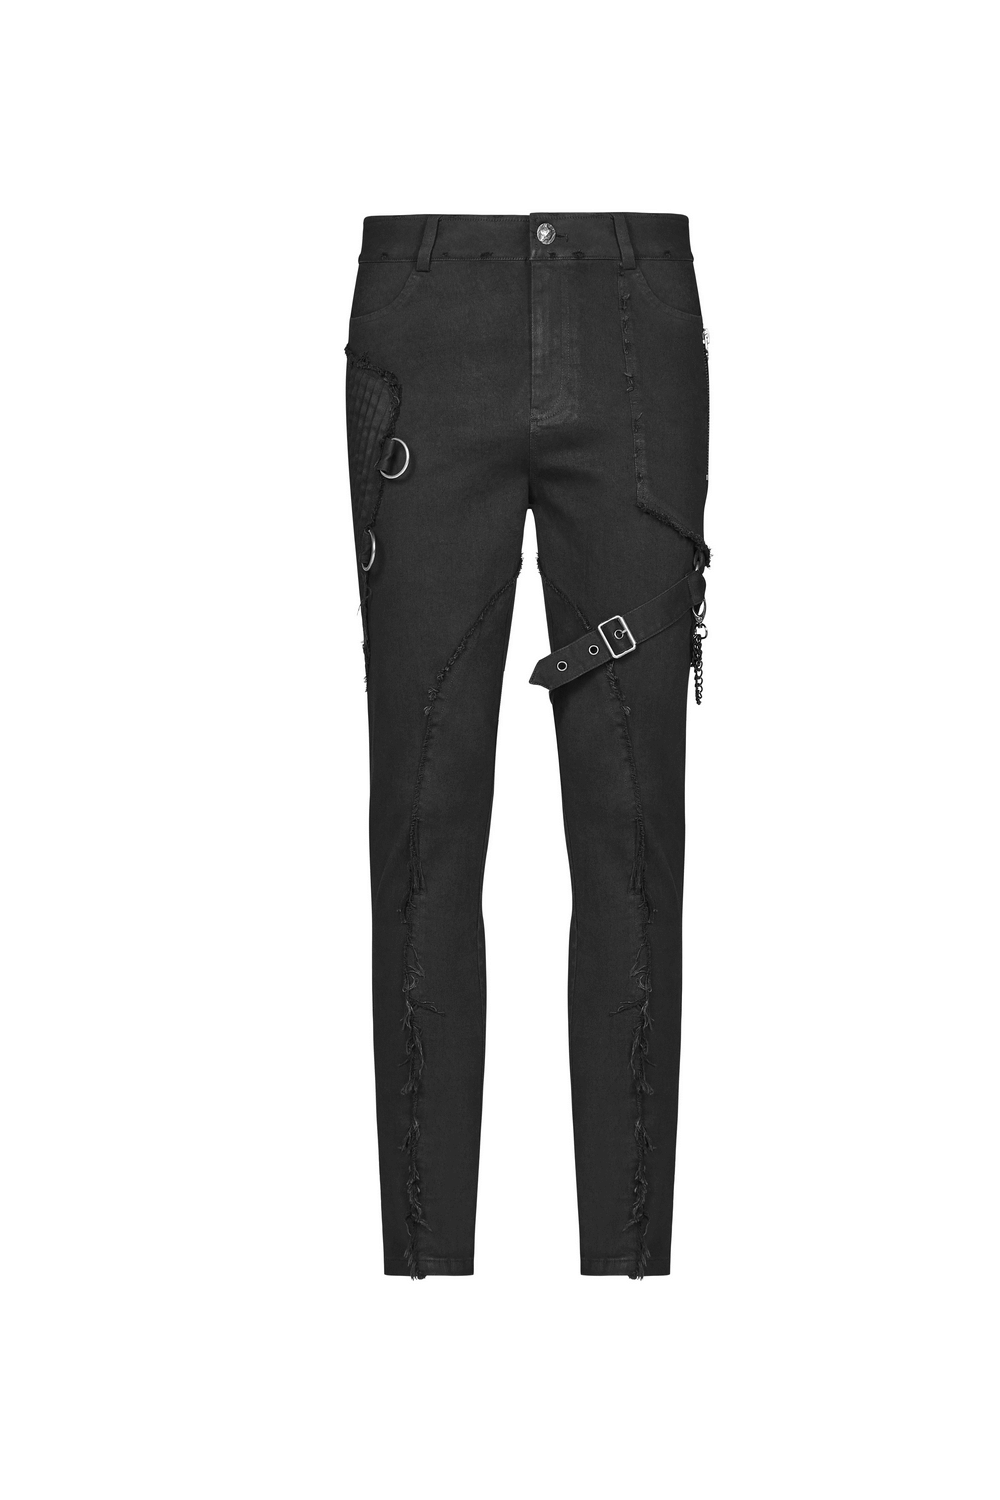 Gothic Punk-Style Black Cargo Pants with Chain Accents